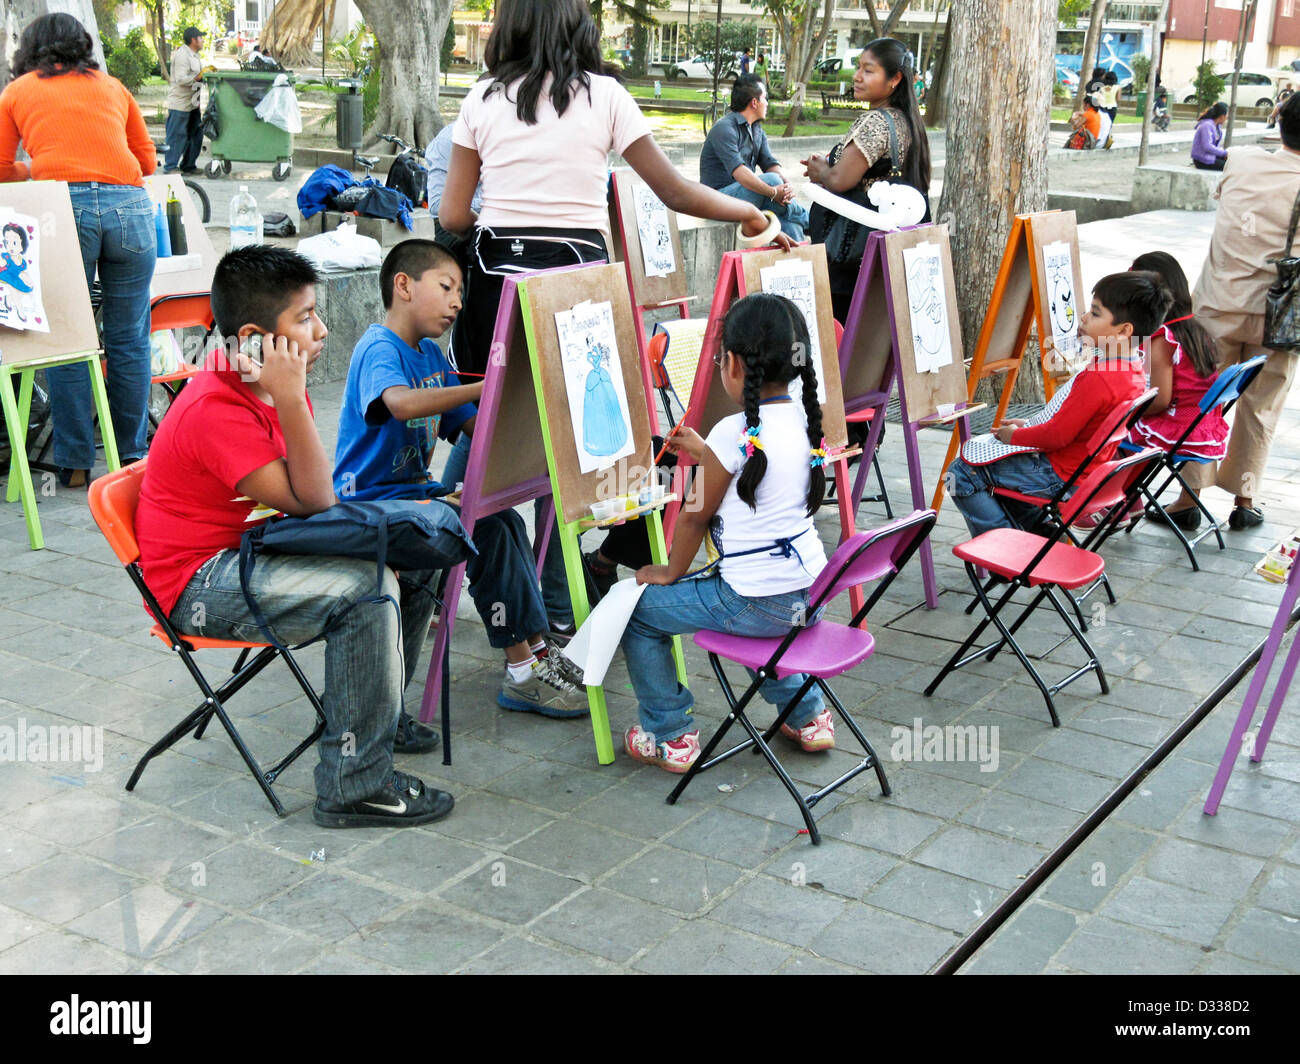 Mexican kids children working at brightly colored miniature easels participate in outdoor art class Llano park Oaxaca Mexico Stock Photo